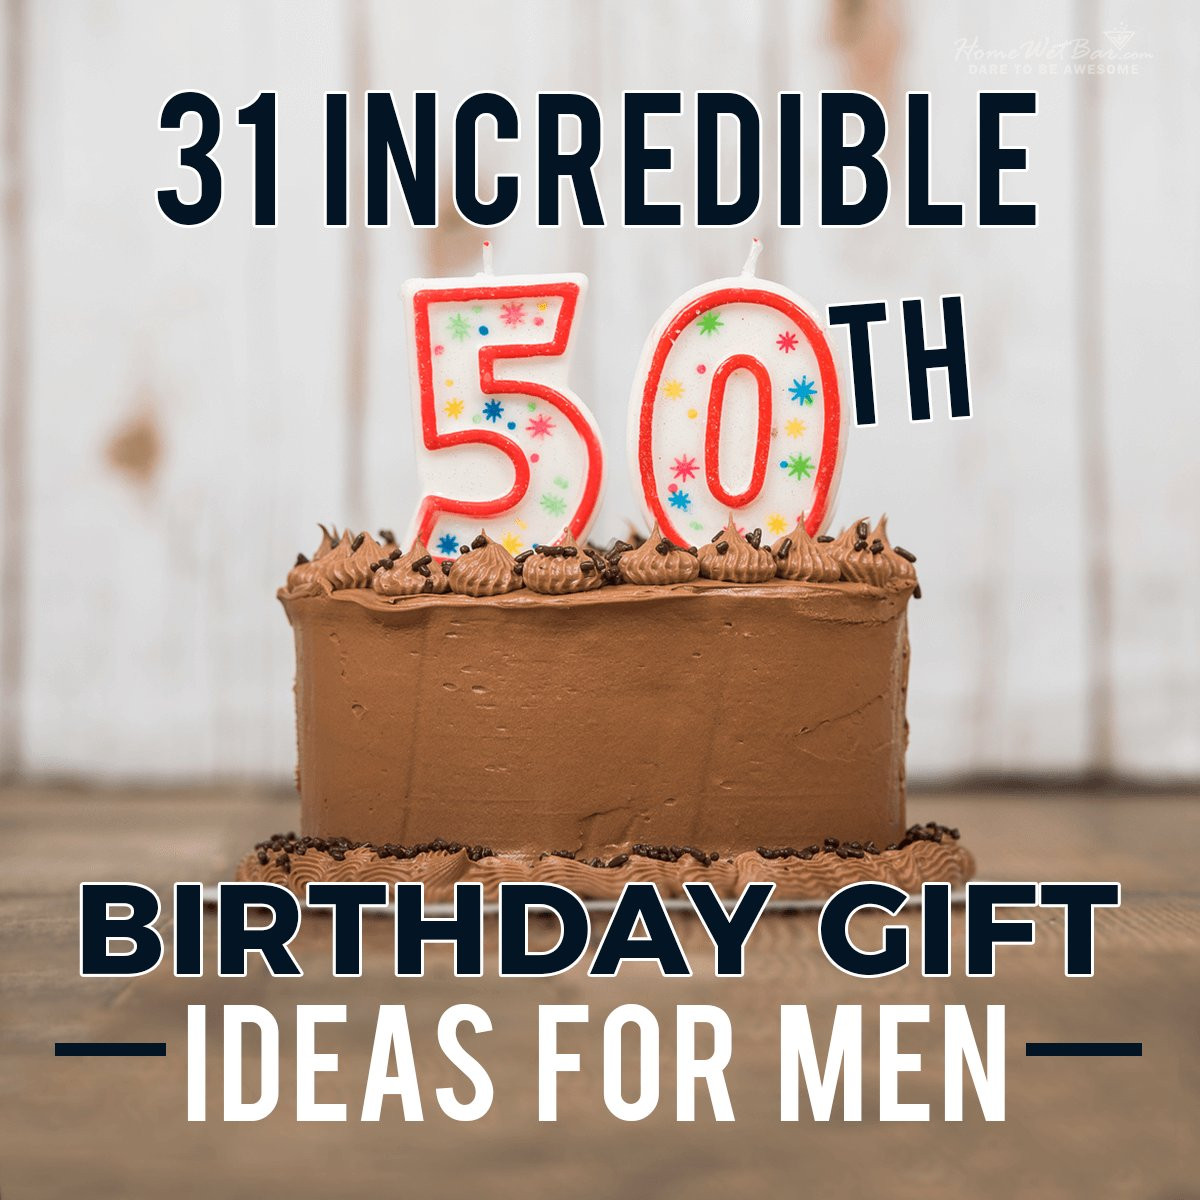 Mens 50th Birthday Gifts
 31 Incredible 50th Birthday Gift Ideas for Men